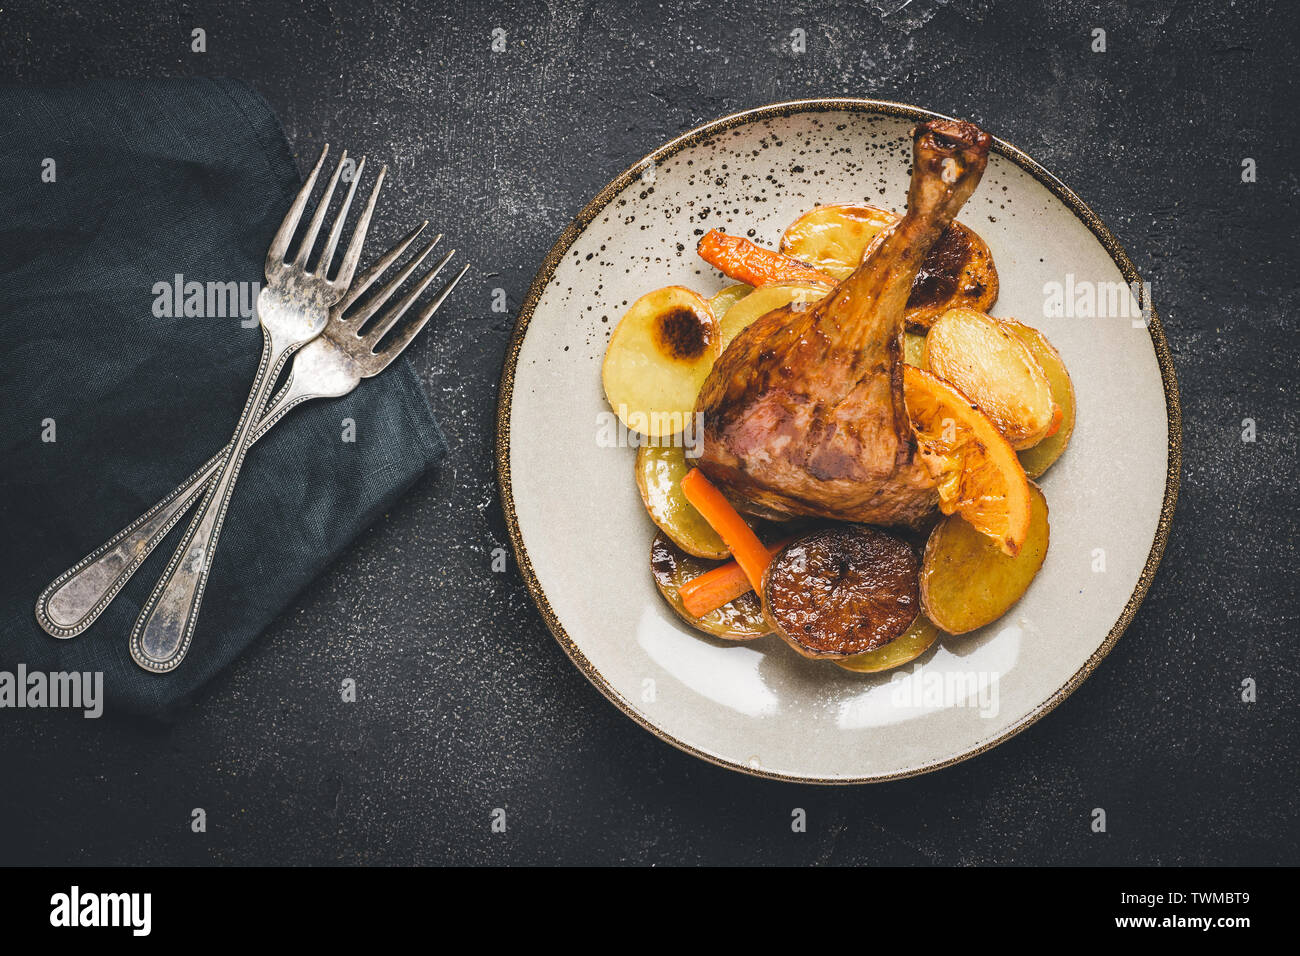 Roasted Chicken Leg Dish with Potatoes, Carrots and Oranges Stock Photo